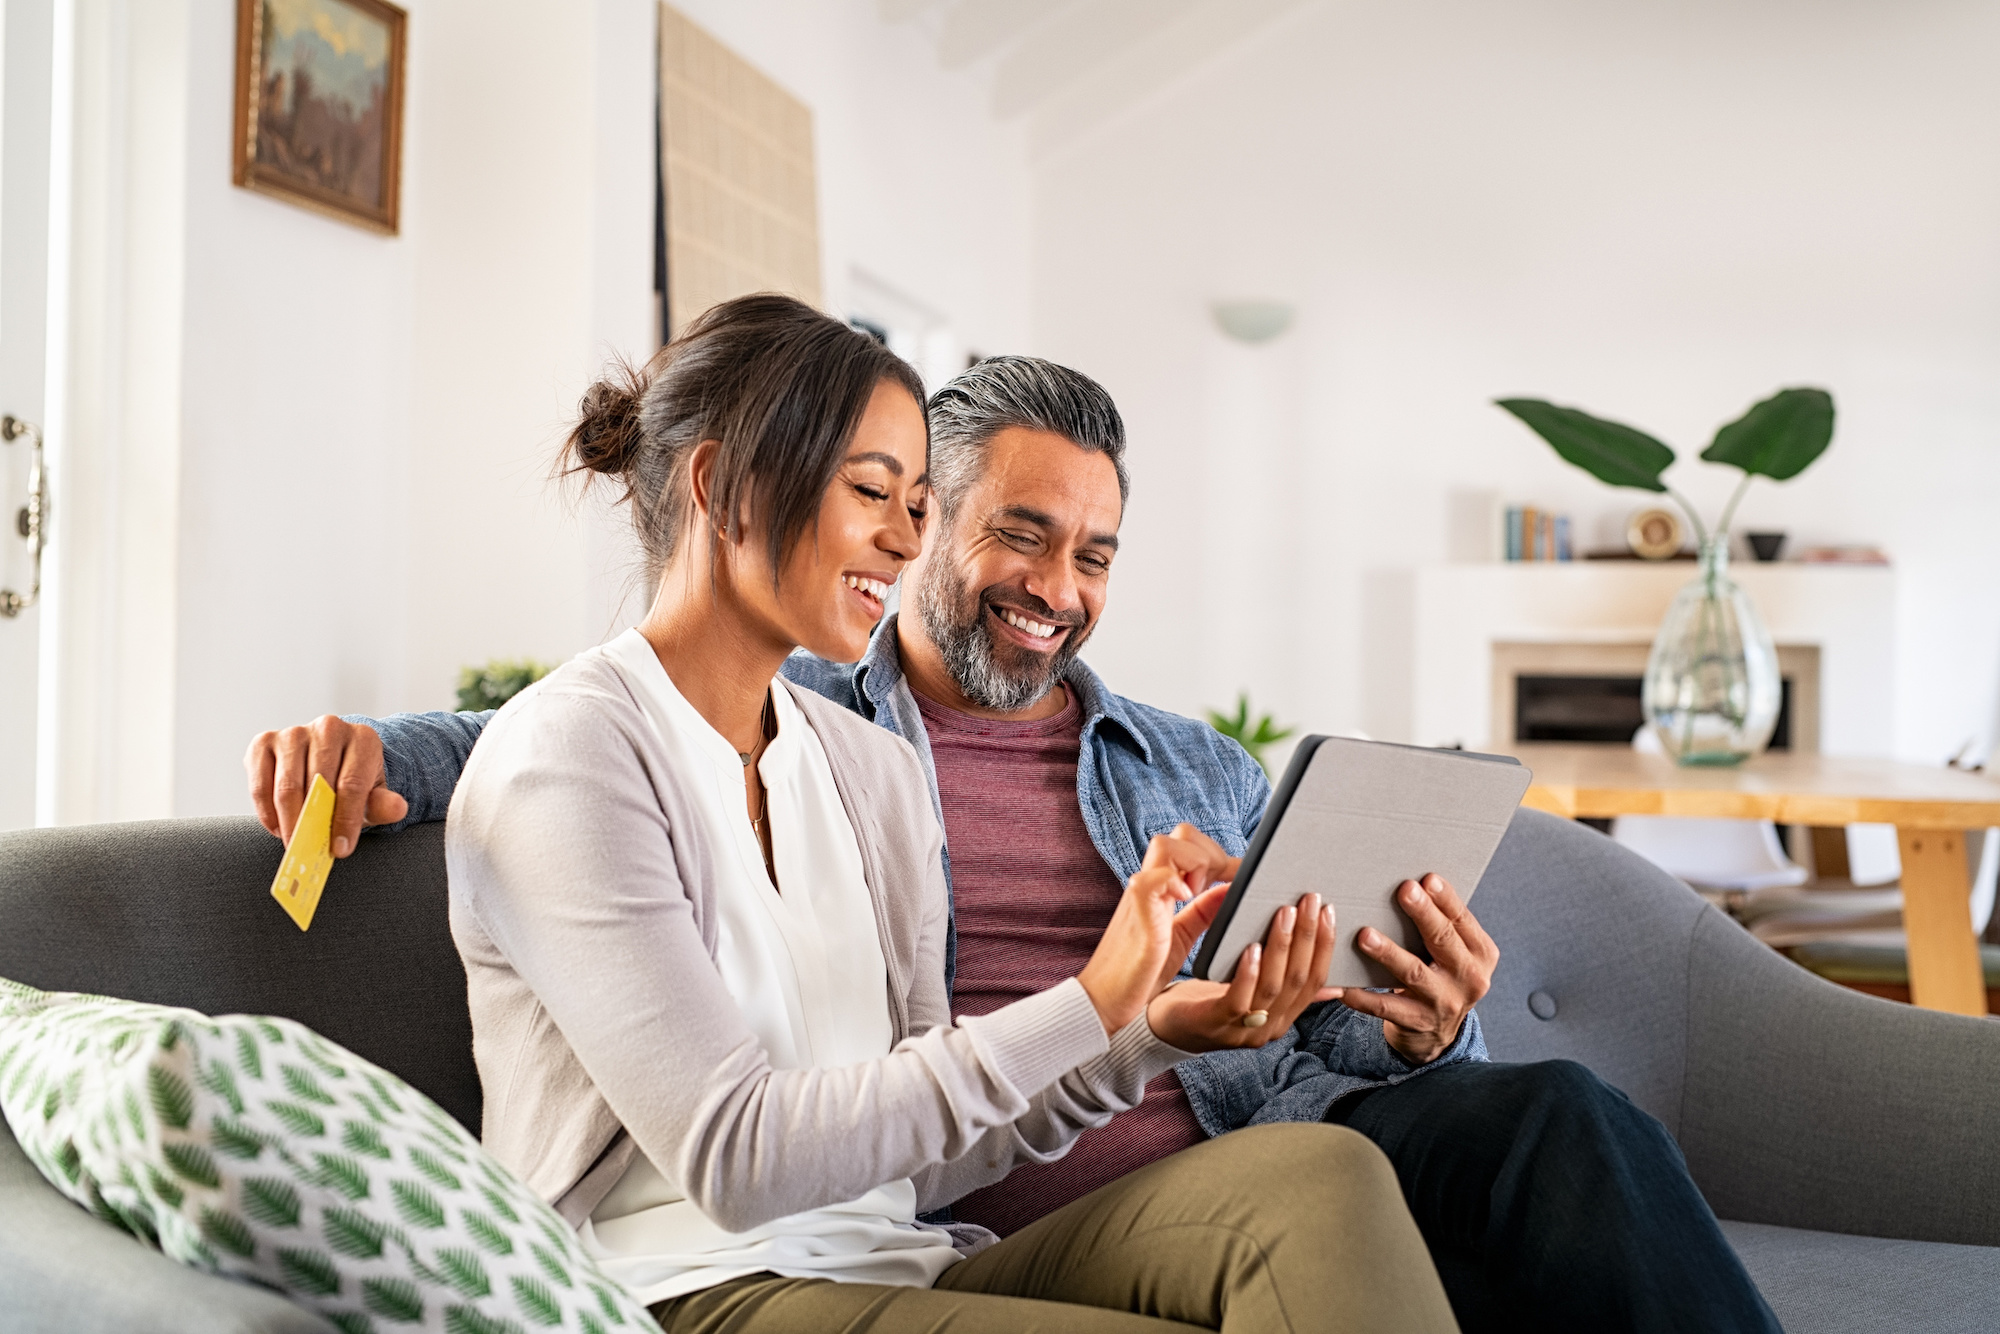 Couple looking at a tablet in a living room